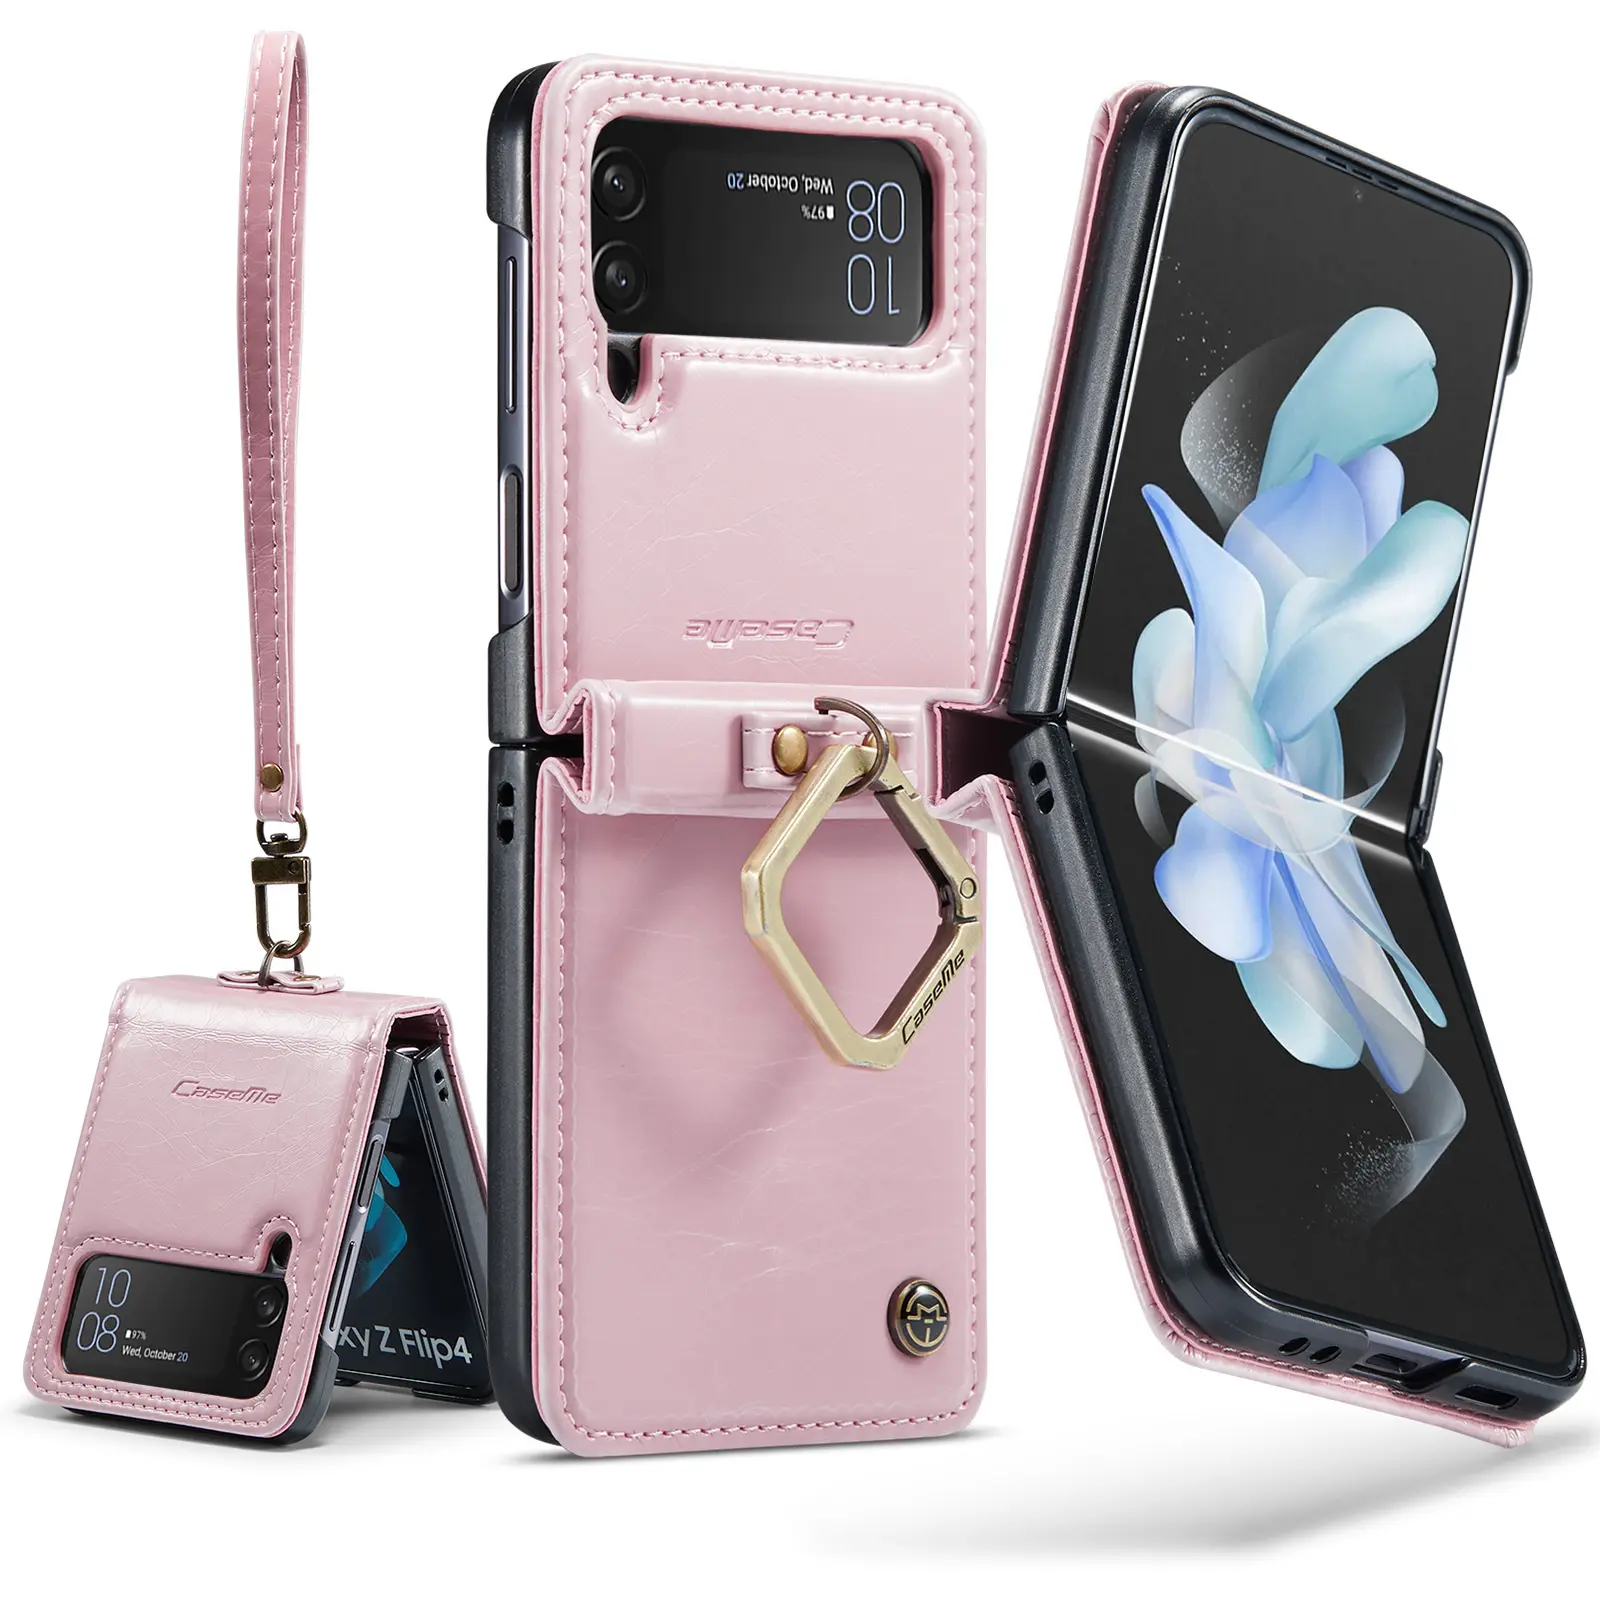 Wholesale New Design PU Leather Case for Z Flip 3 phone case Z Flip 4 5G Folding back cover Ring hand cord protection holster